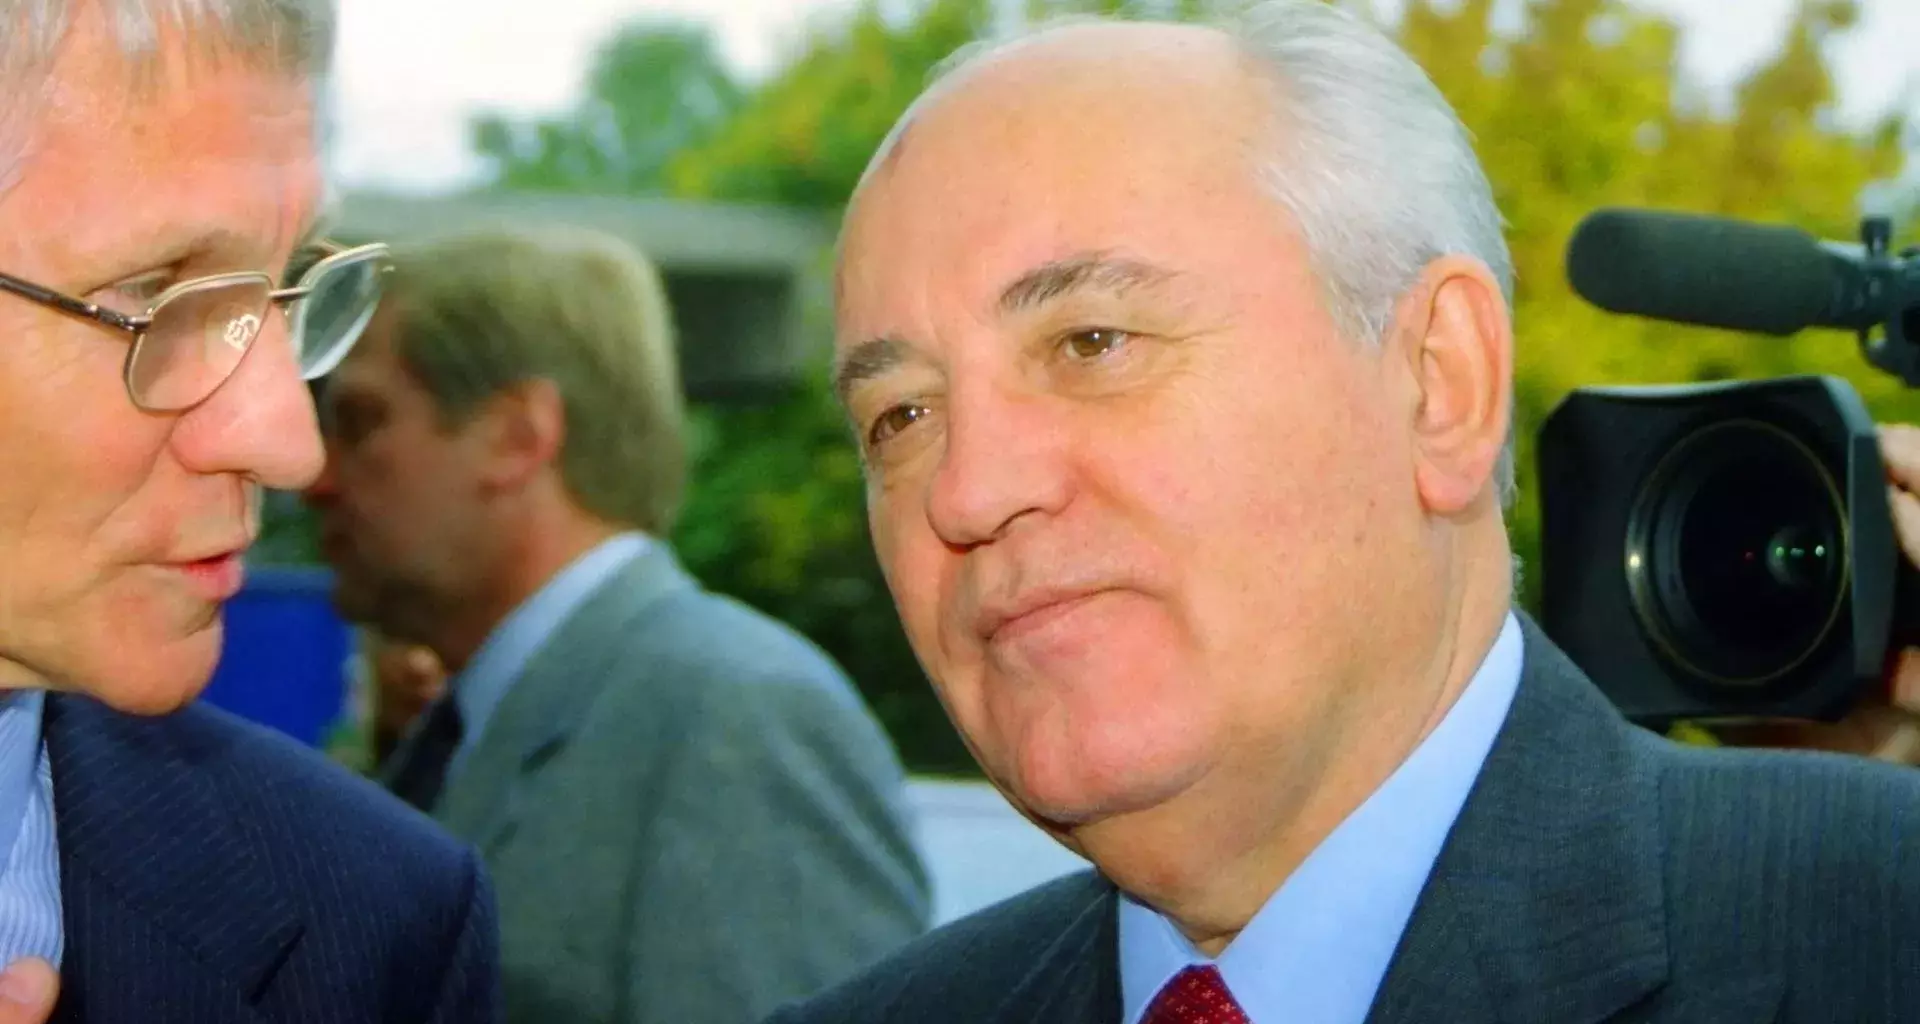 Mikhail Gorbachev, historical figure and head of state of the Soviet Union